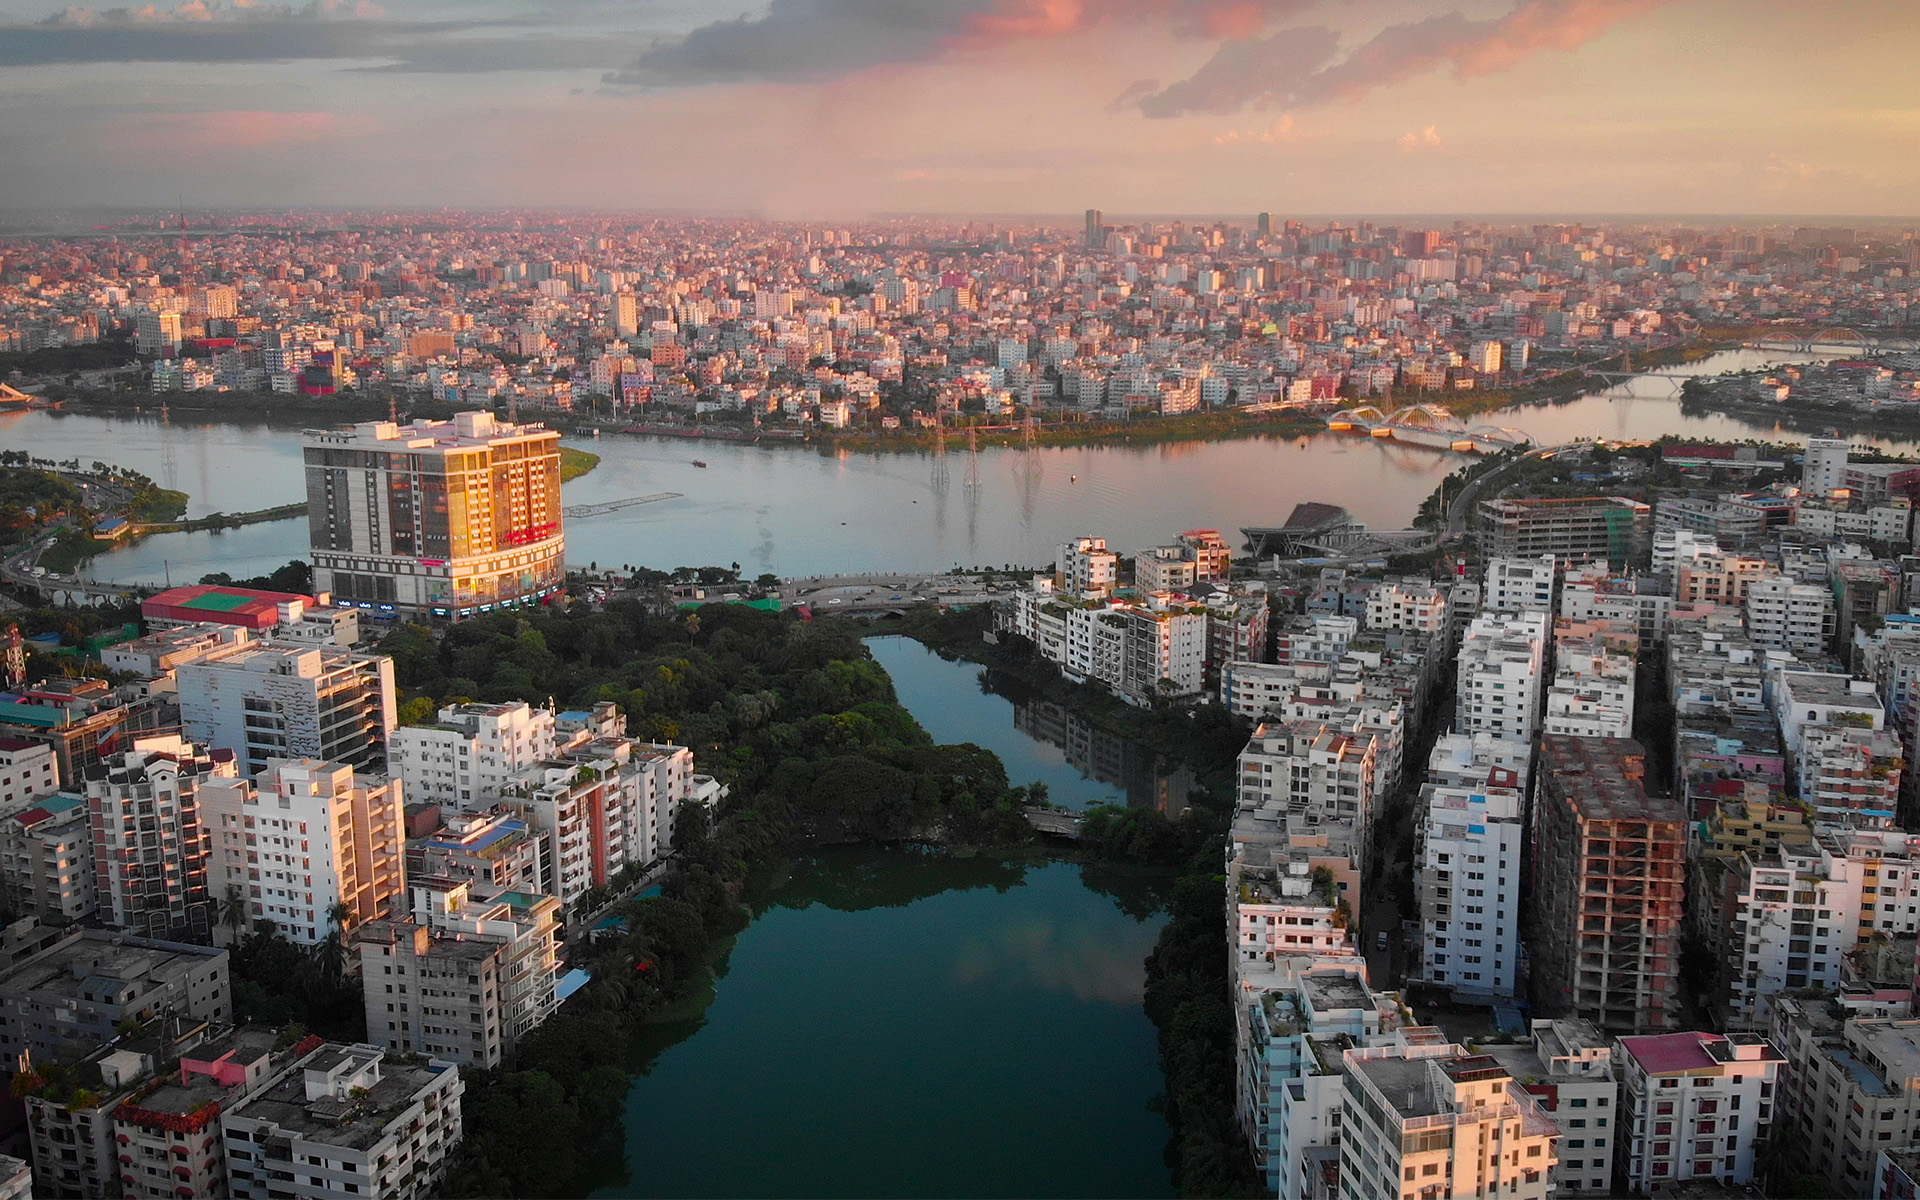 Bangladesh’s amazing growth: A potential catalyst for increased investment